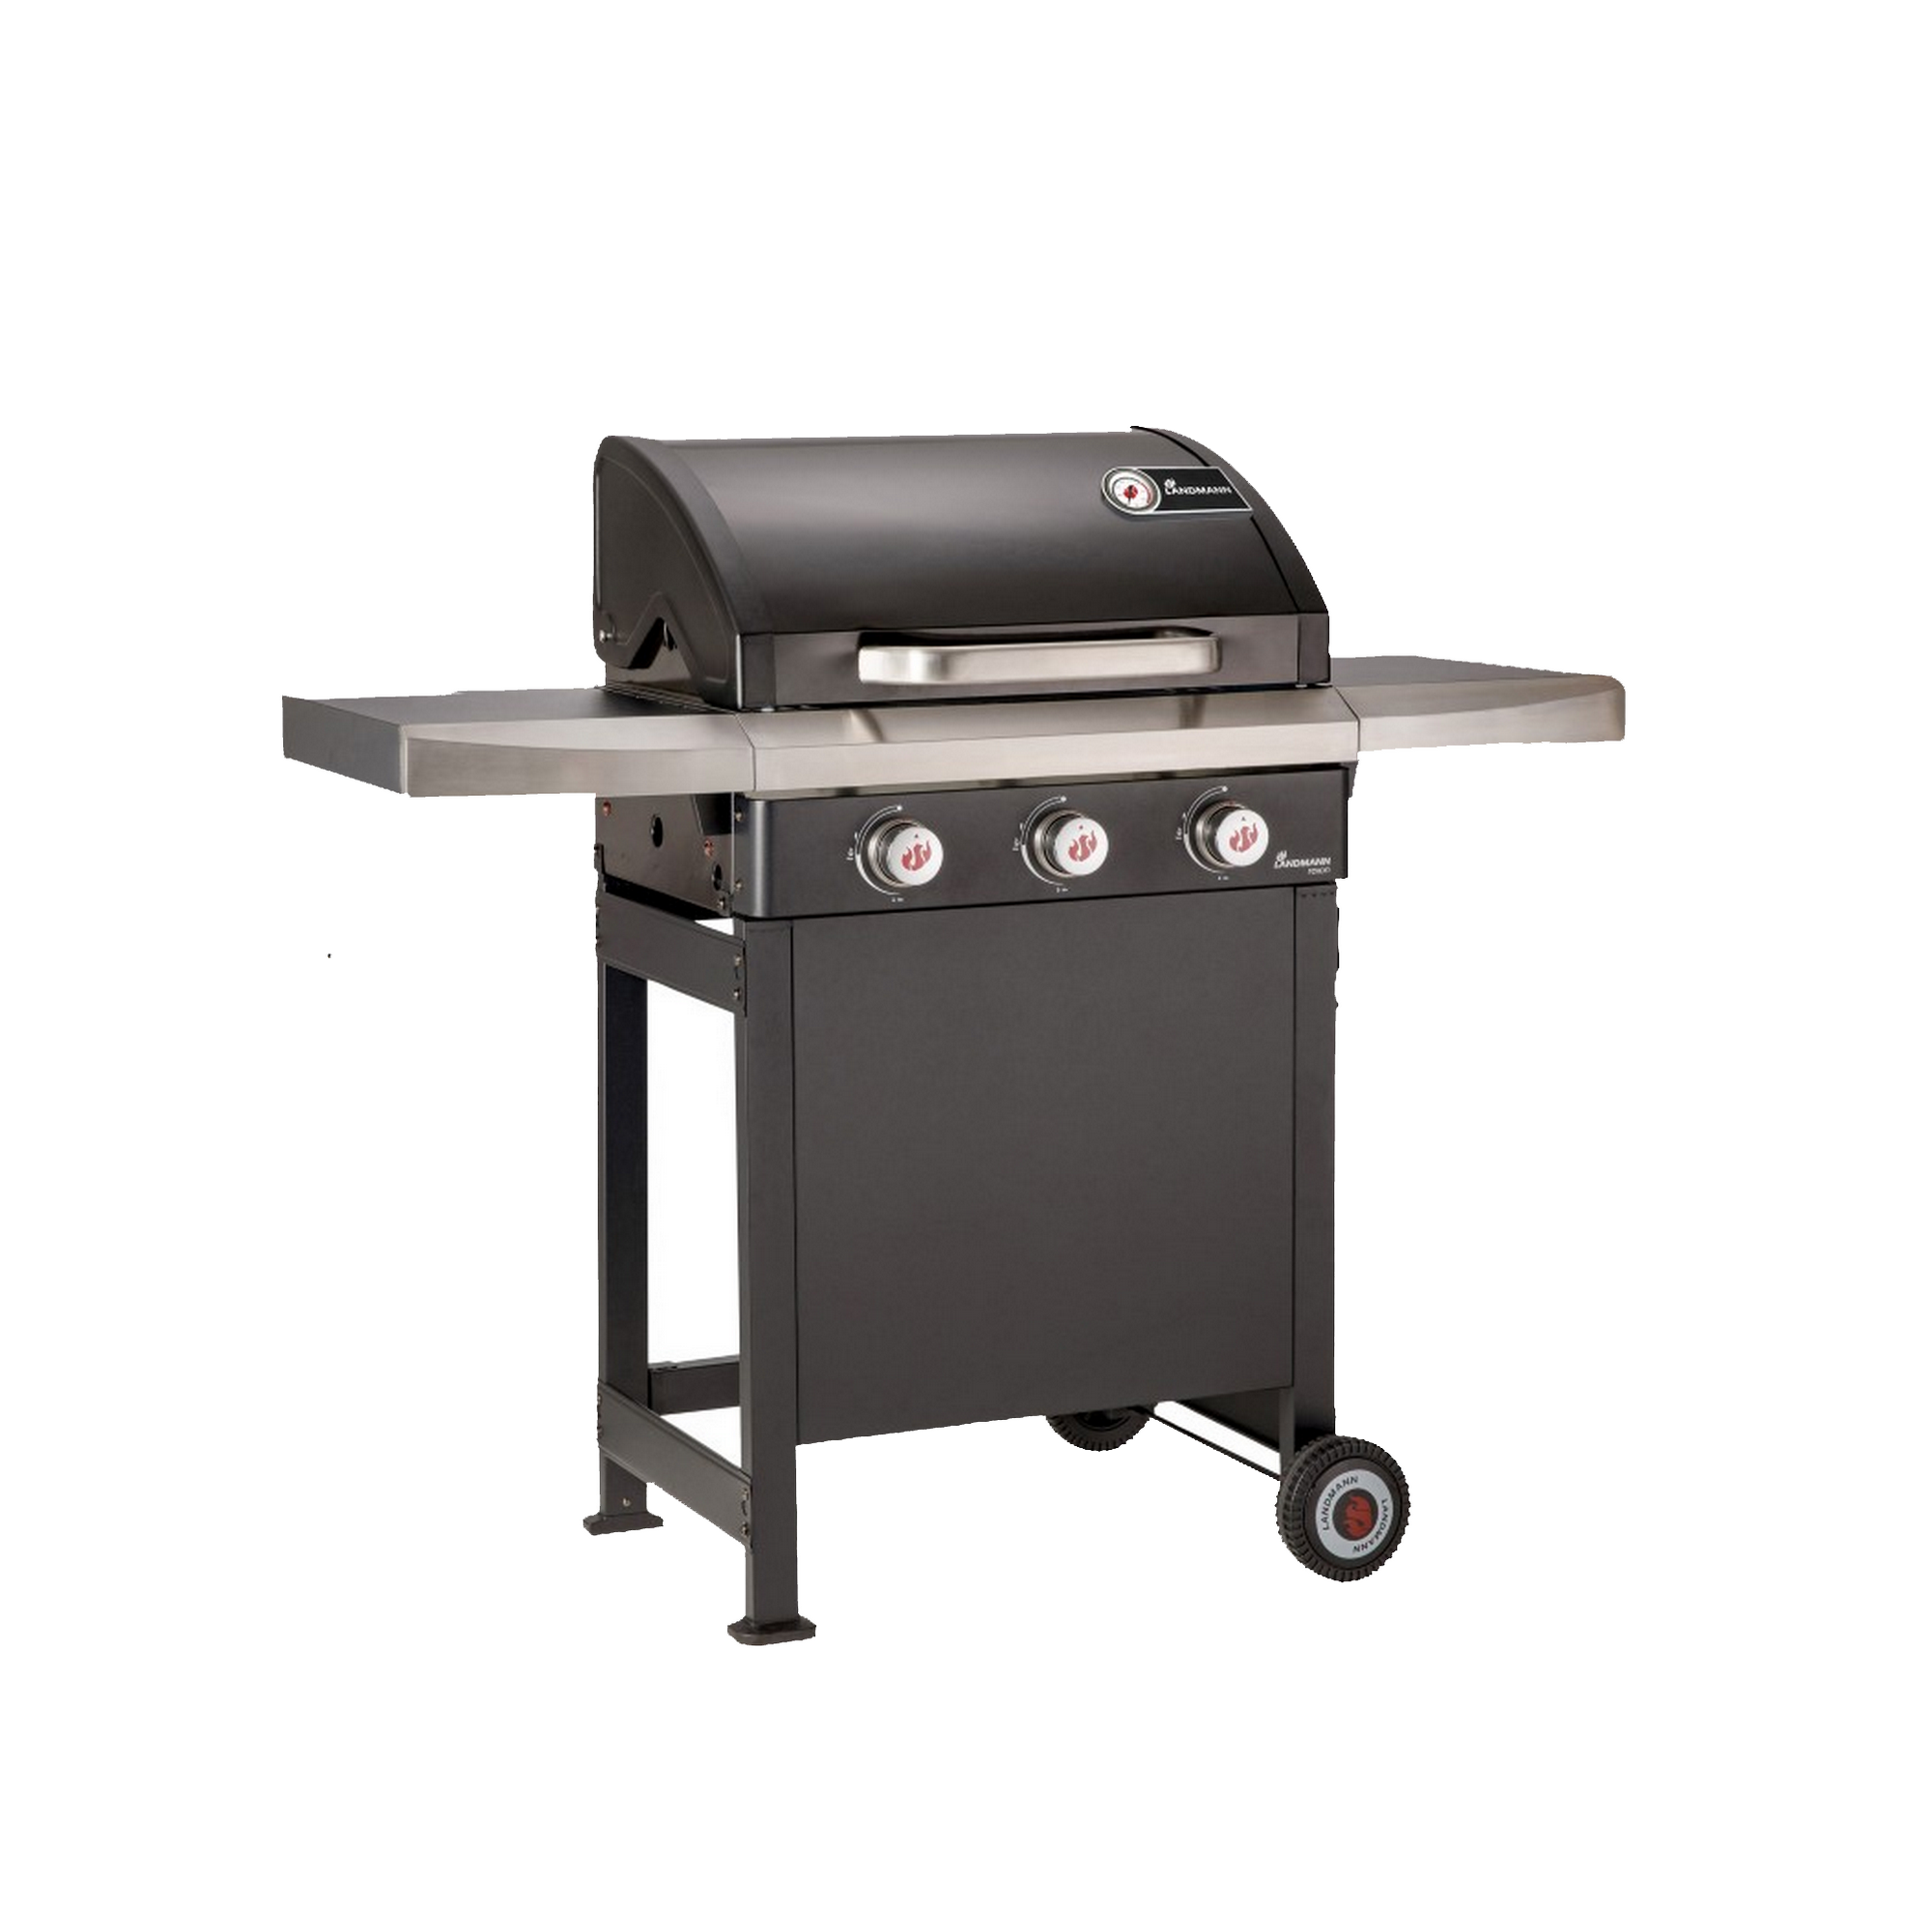 Gasgrill 'Rexon PTS BR 3.0' schwarz/silbern 135 x 120 x 52 cm + product picture